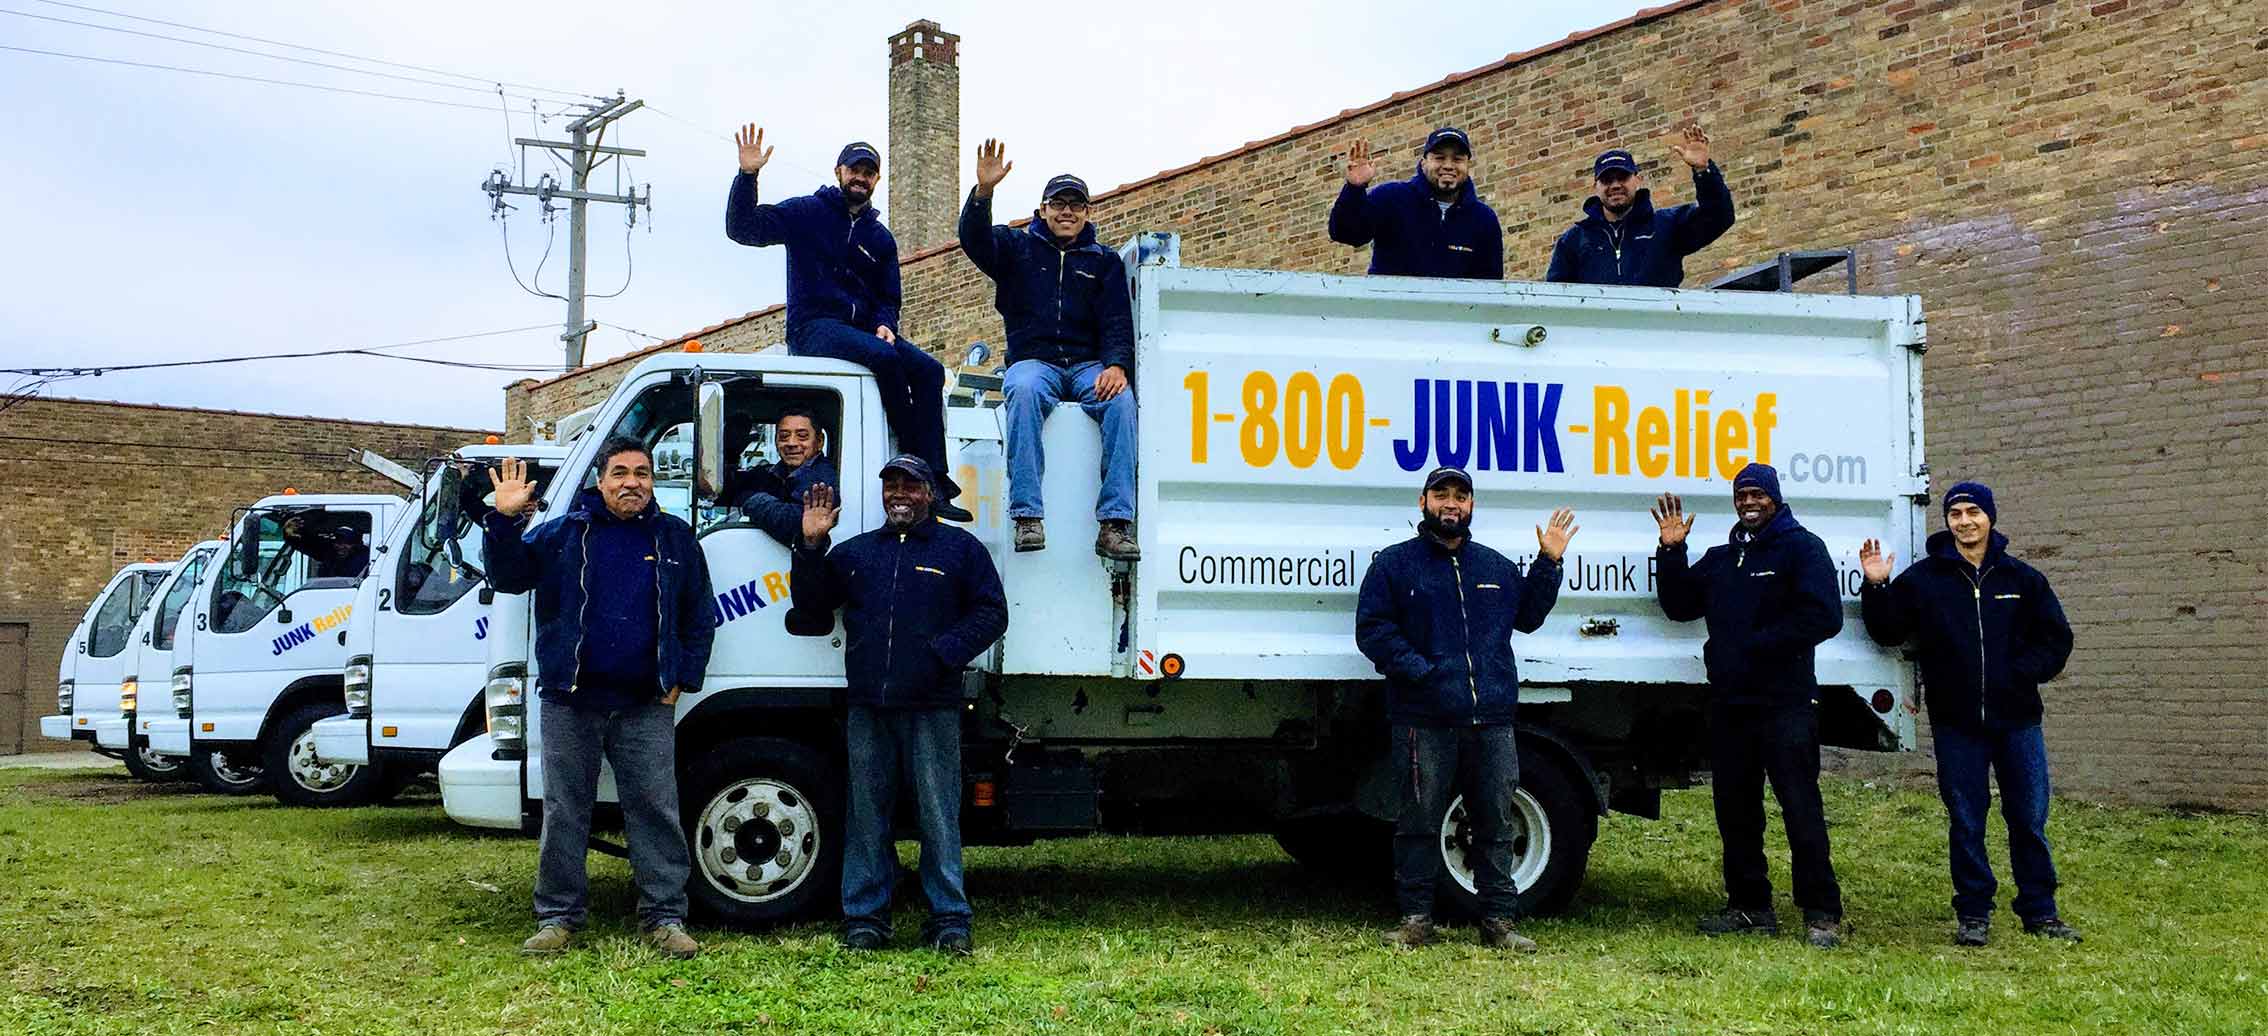 The Junk Relief Team in Chicago